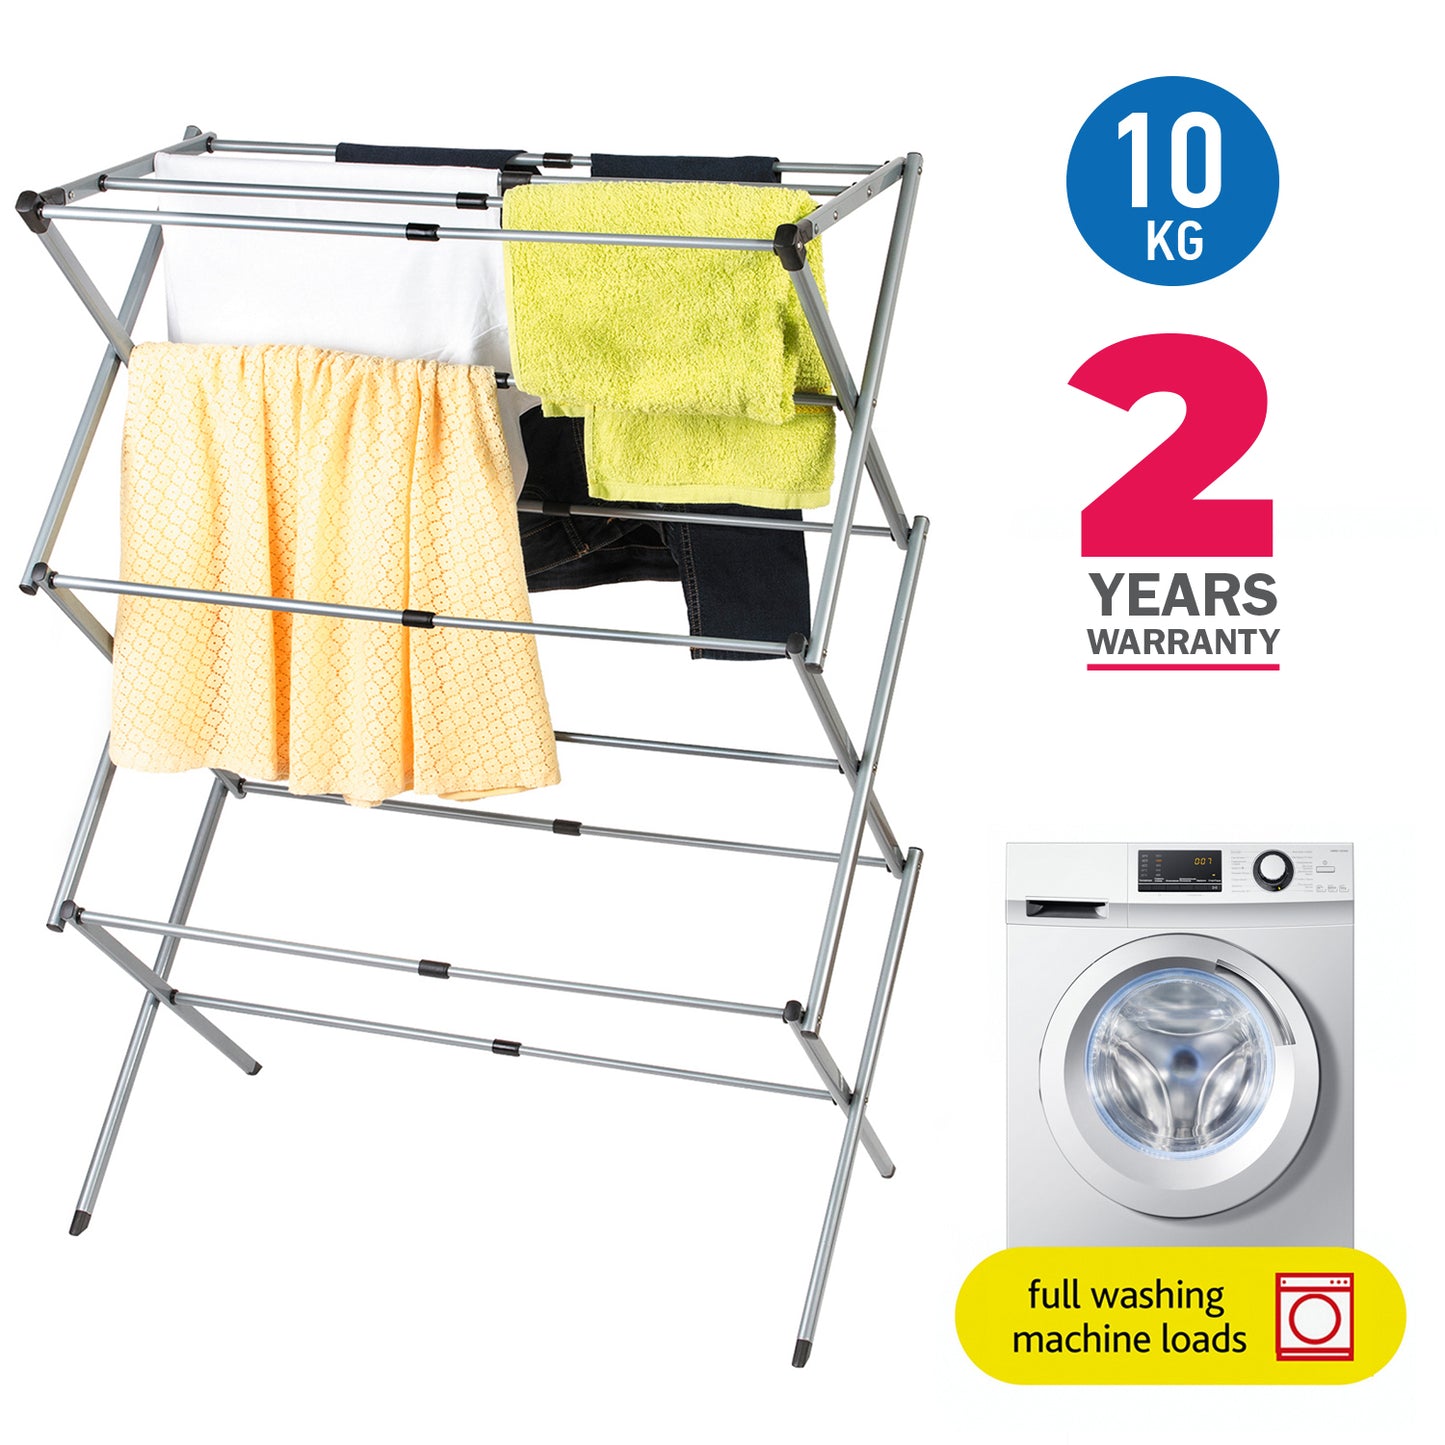 Foldable Drying Laundry Rack, Portable Clothes Horse Made of Rustproof Steel, art moon Gobi, 3